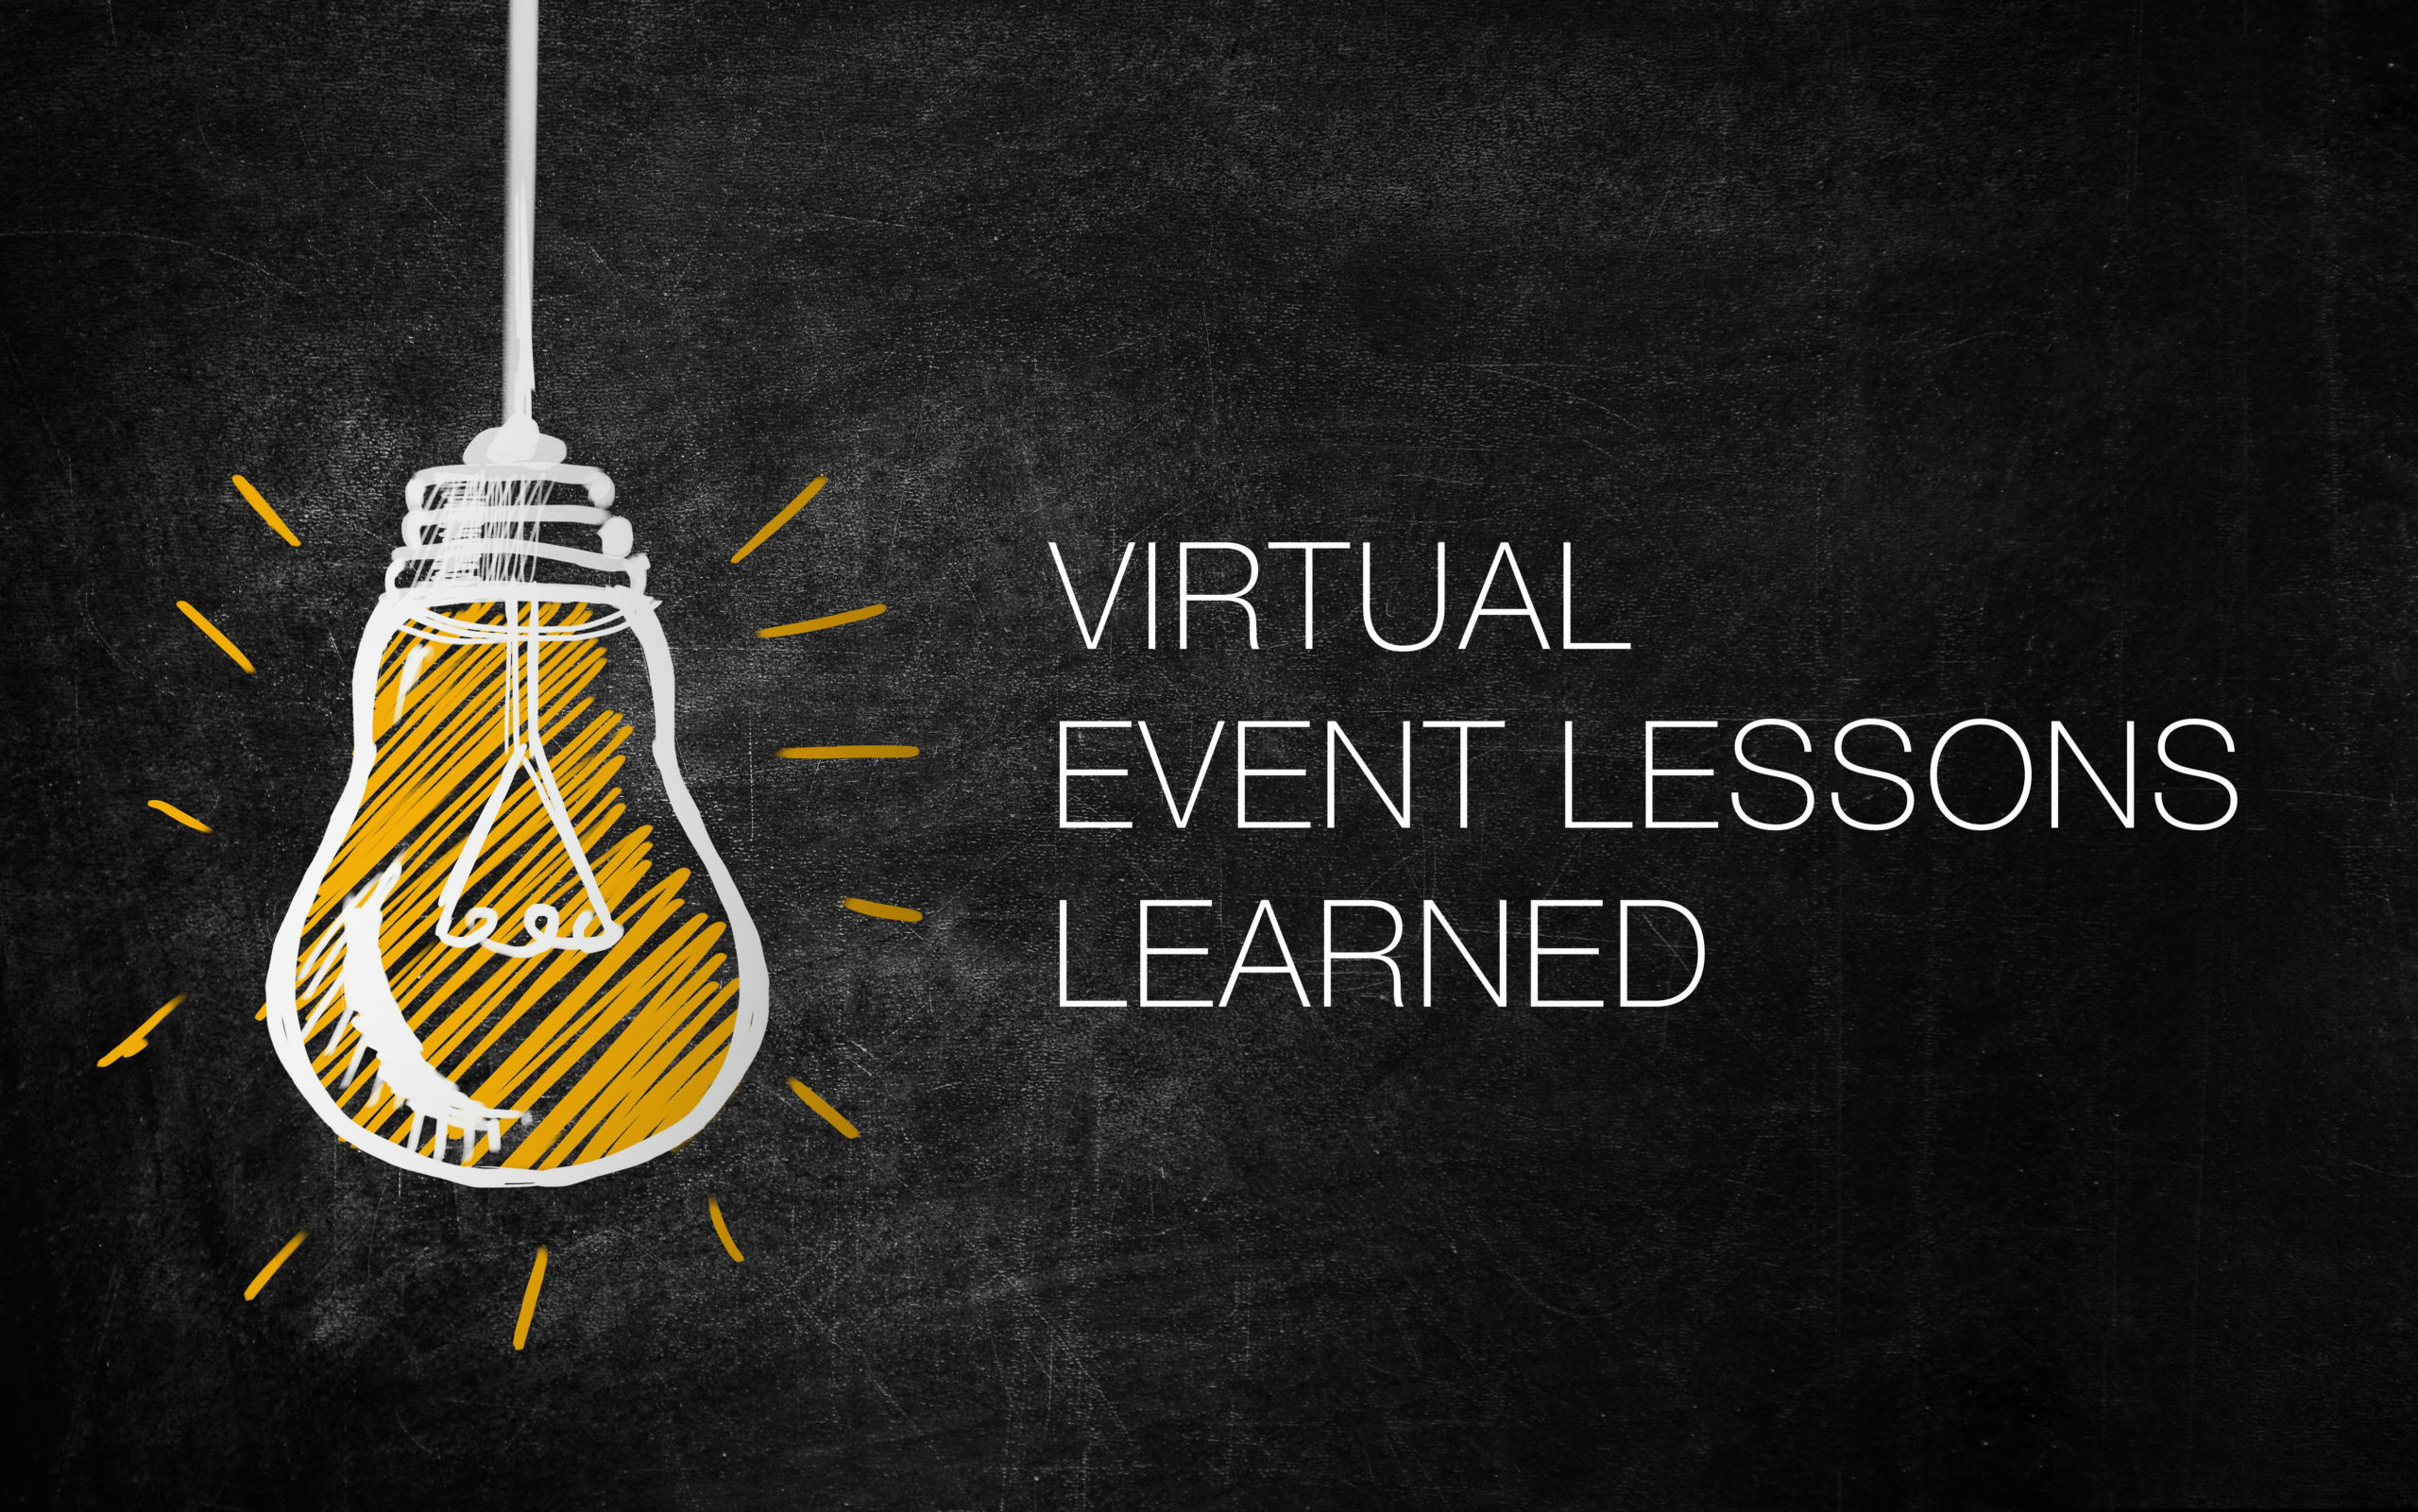 Virtual Event Lessons Learned from PEI